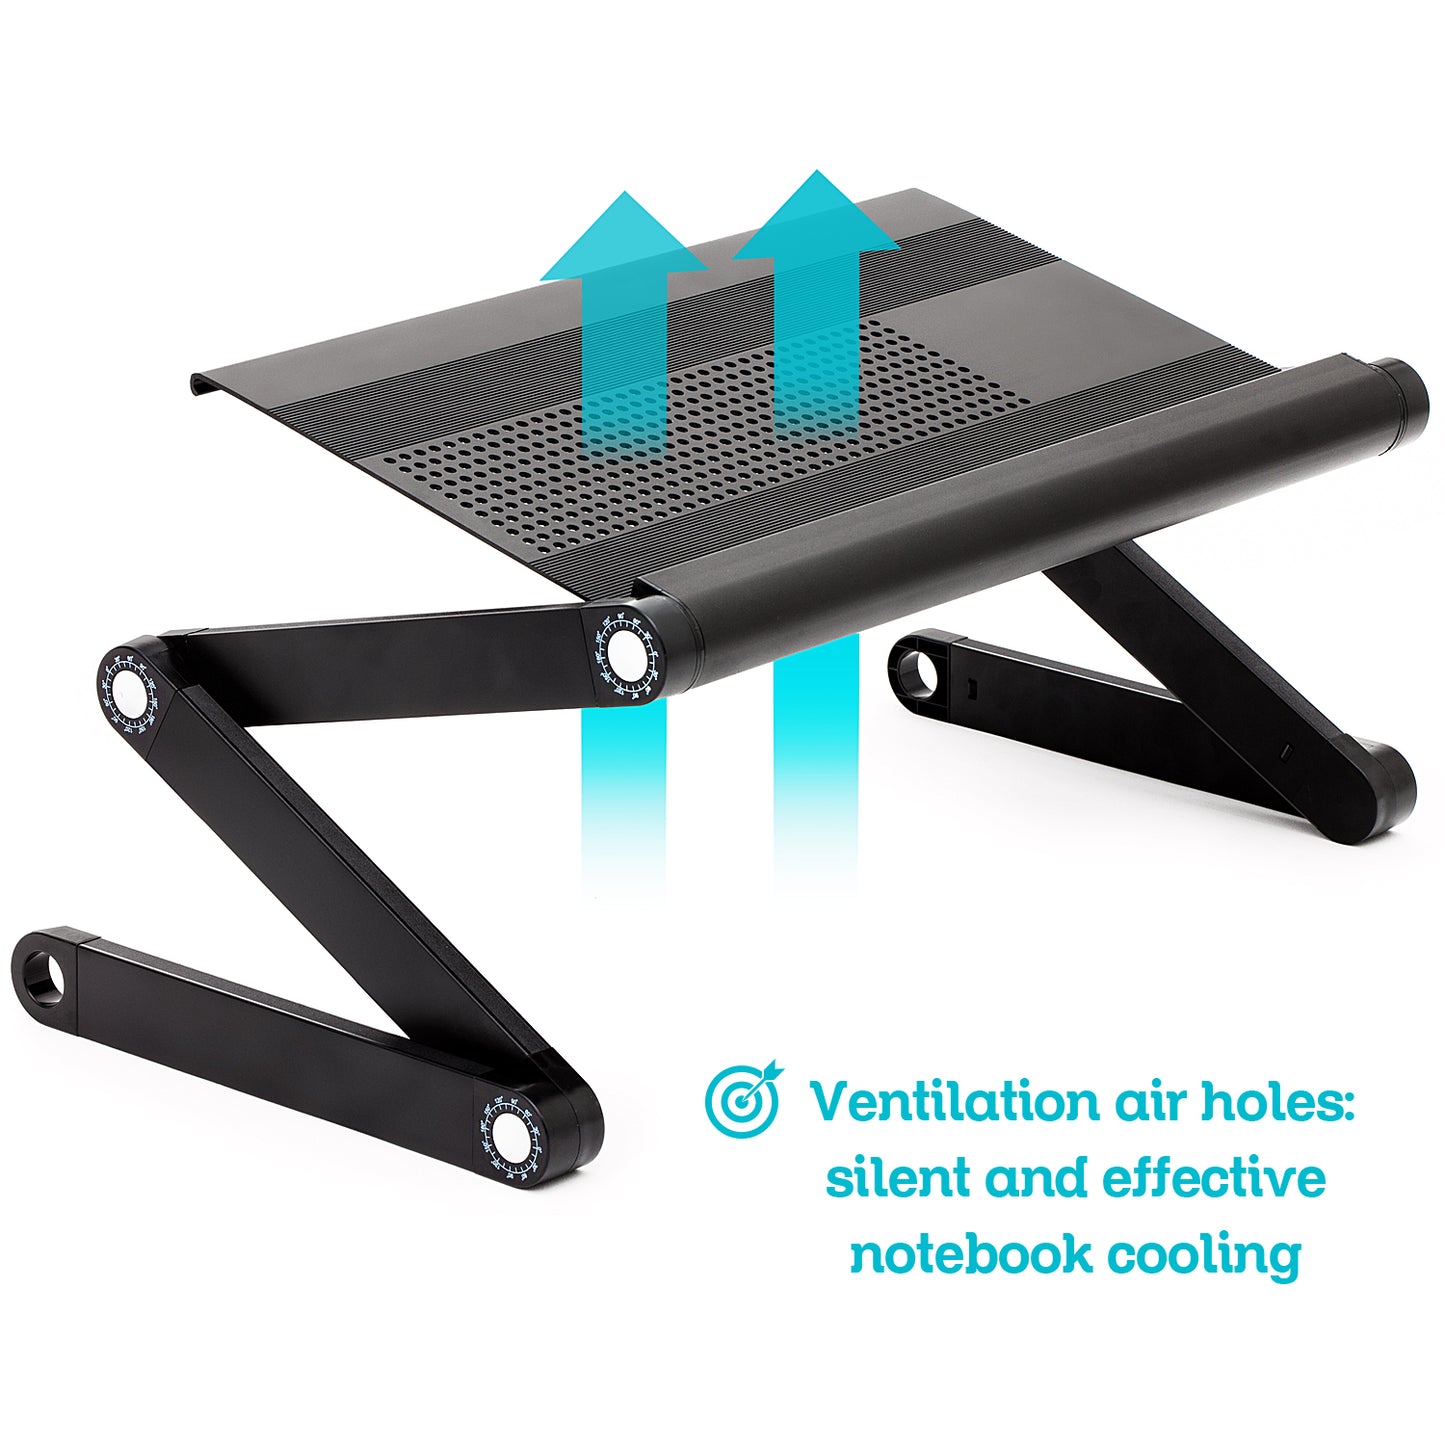 Laptop Stand, Laptop Stand for Bed, Adjustable Laptop Stand, Folding Laptop Stand, Cooling Tray, WonderWorker Nobel, 14